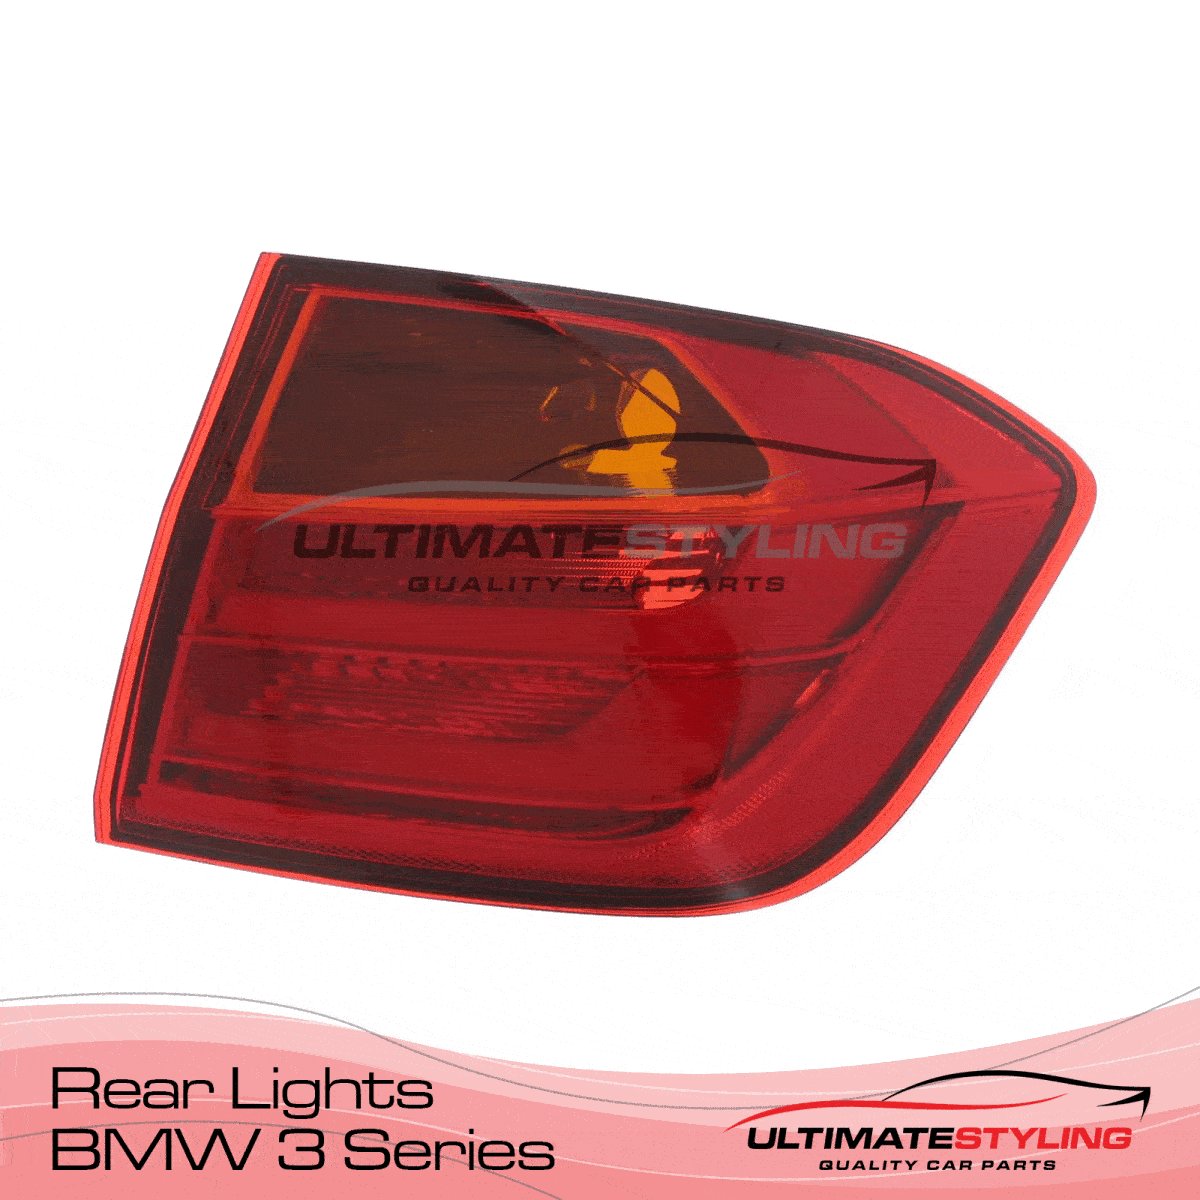 360 view of a BMW 3 Series Rear Light